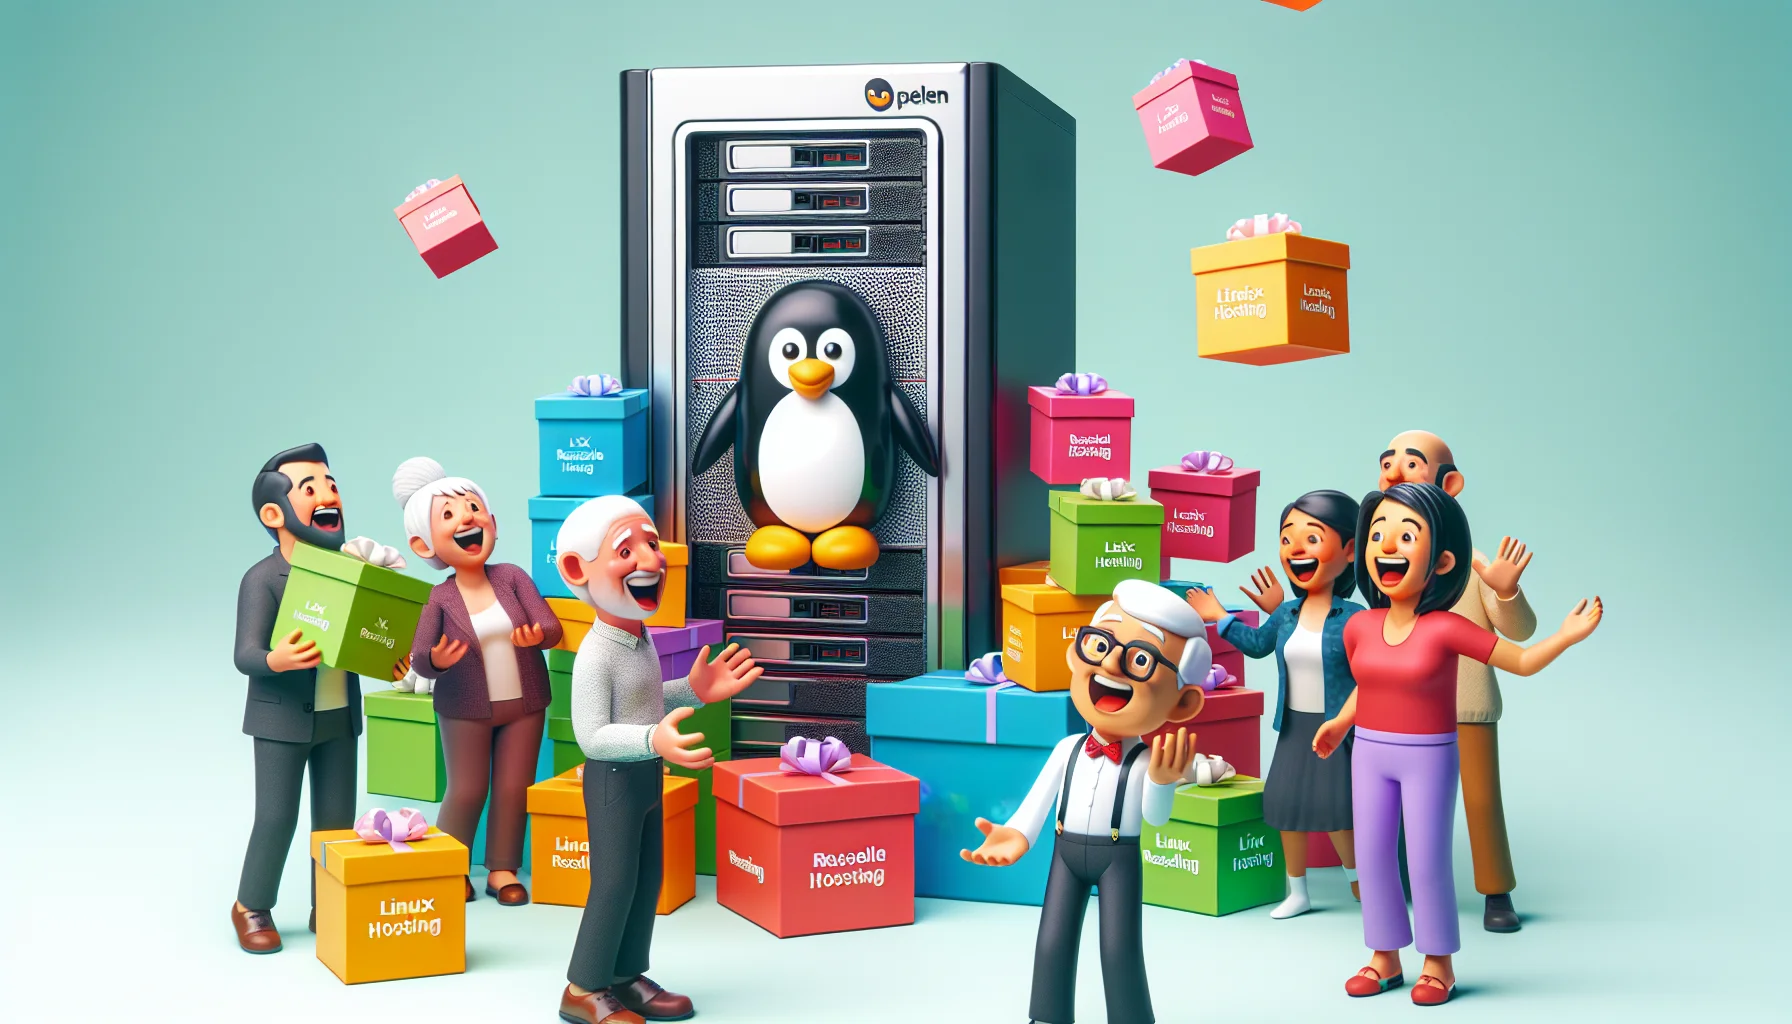 Create a playful and realistic image of a bustling virtual marketplace. In the center, a cheerful server, identifiable by its shiny case with a penguin logo, is juggling multiple colorful boxes. Each box is labeled with different features of 'Linux Reseller Hosting'. Browsers represented as diverse individuals - an elderly Caucasian man, a young South Asian woman - are laughing, their eyes wide with curiosity. Some of them are reaching out their hands to catch a box. The atmosphere is lively and inviting, perfect for attracting potential web hosting enthusiasts.